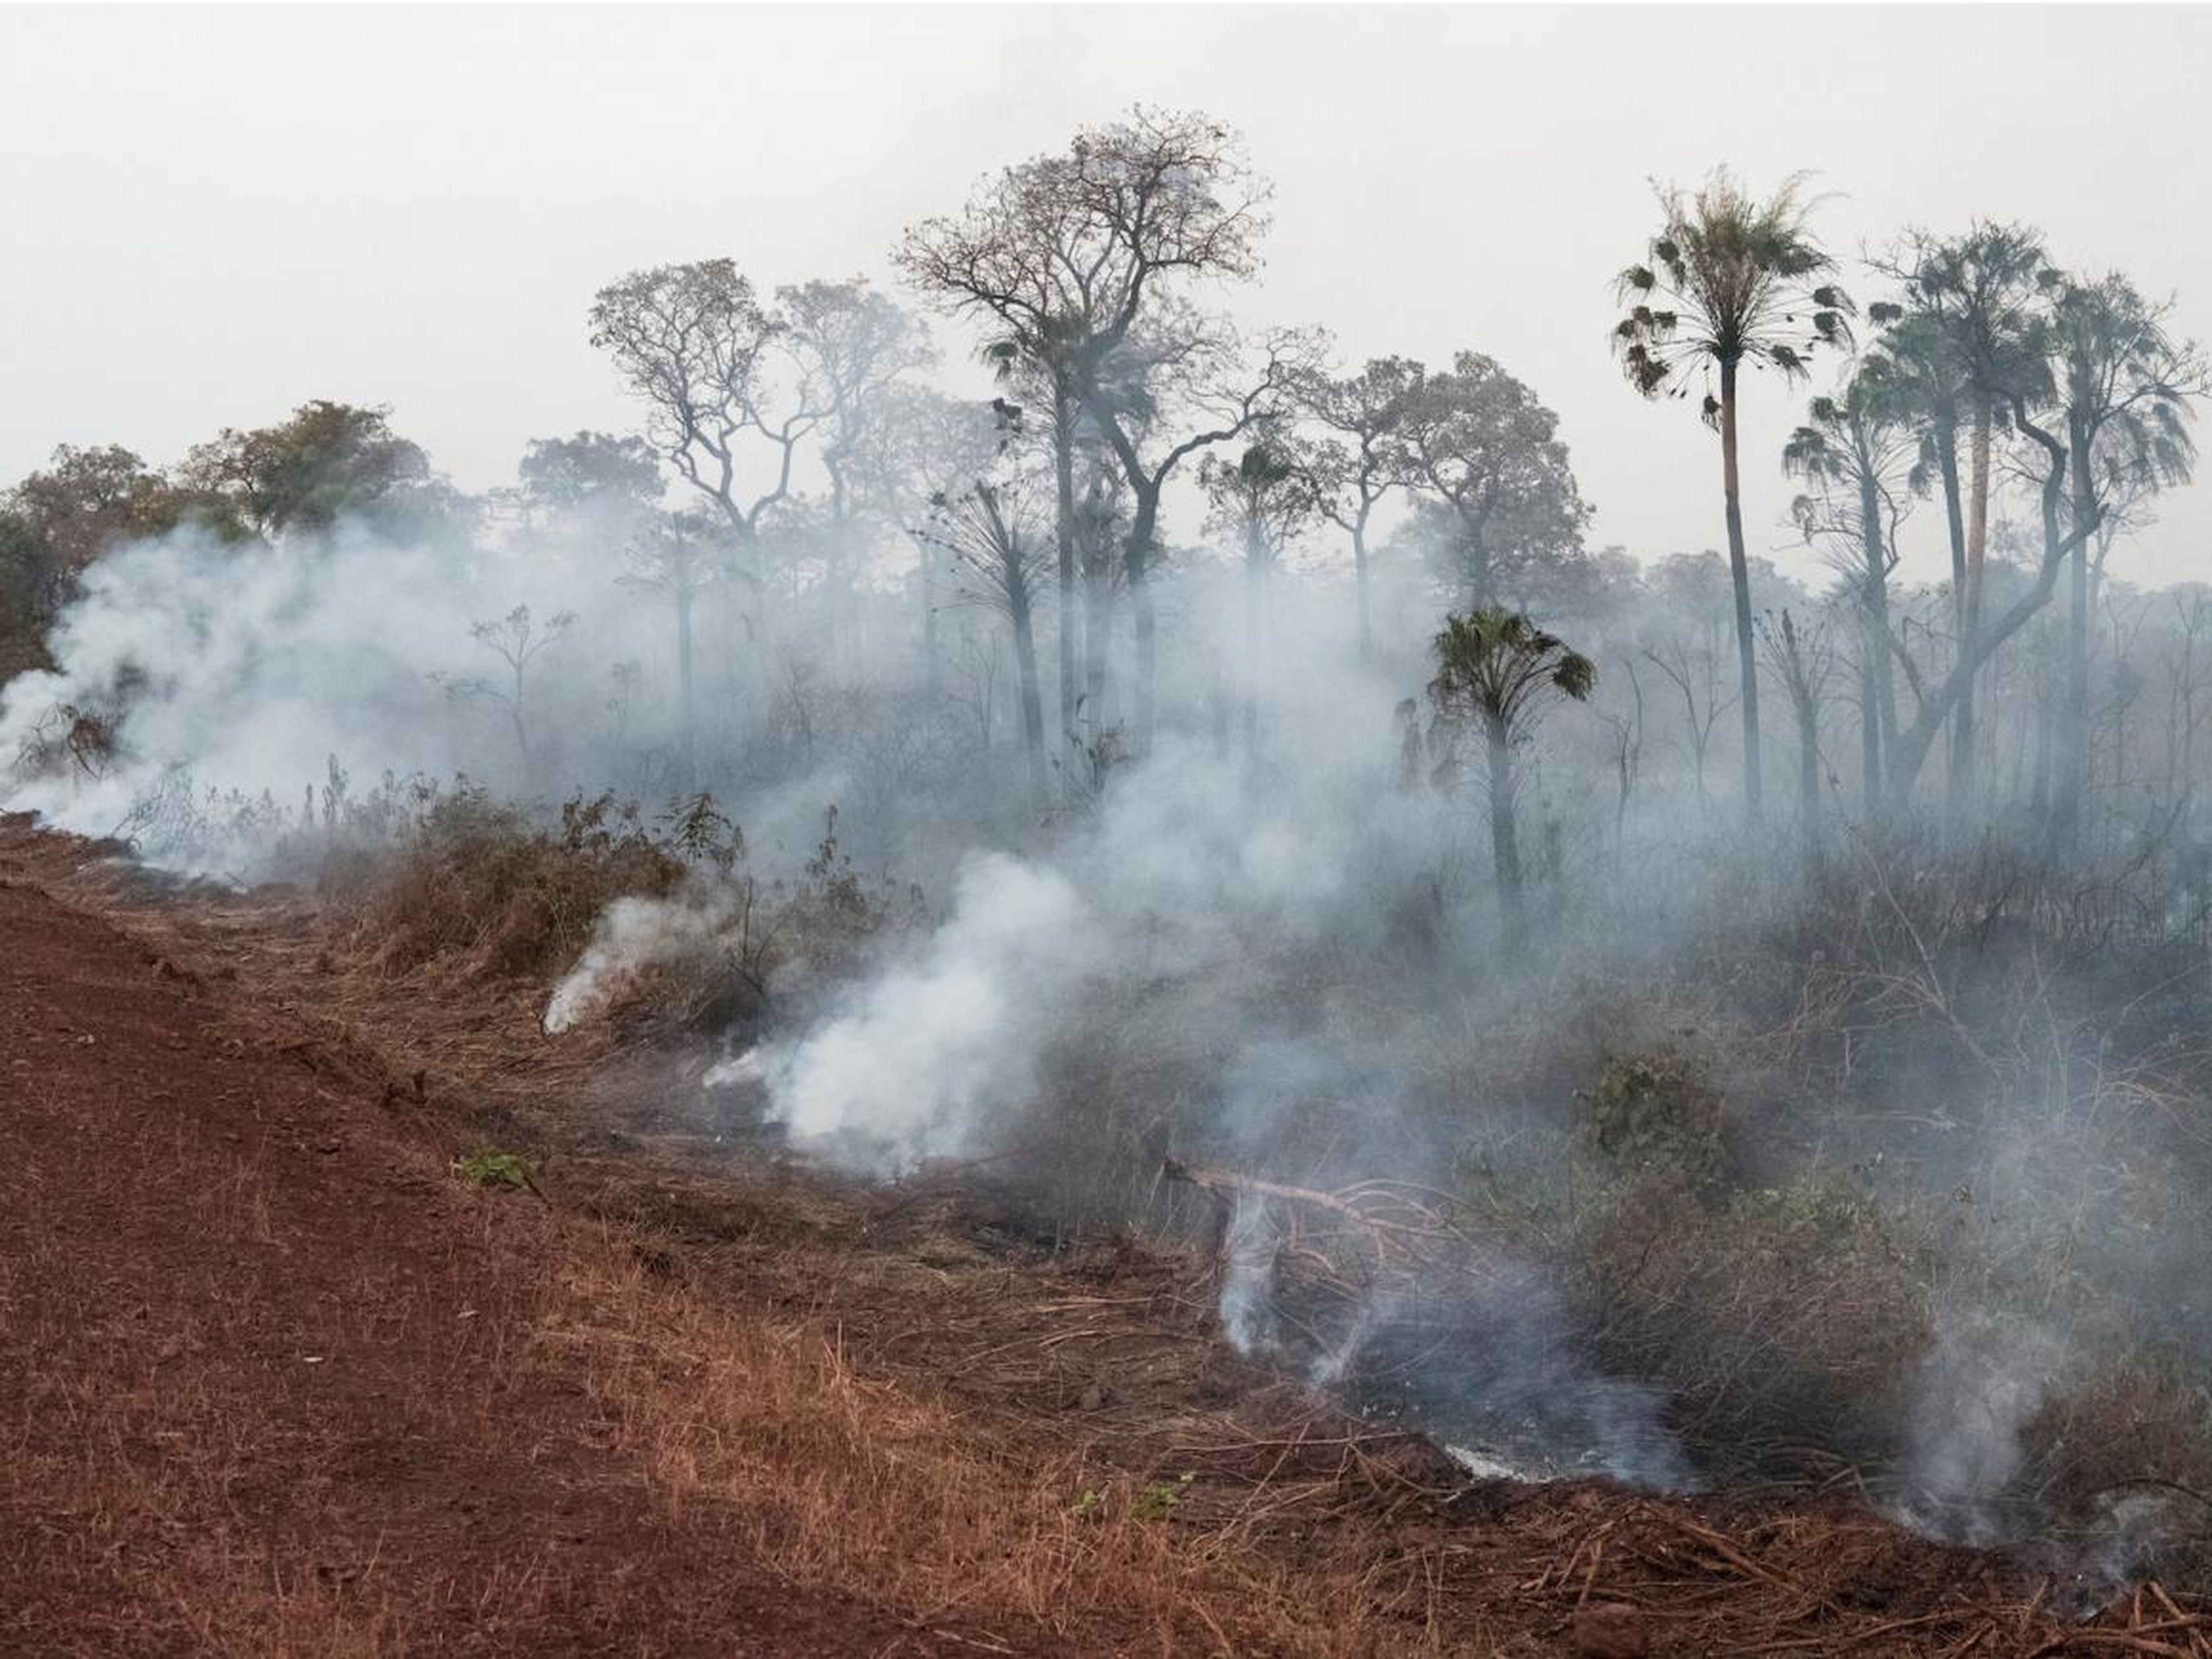 Over half of fires in Brazil this year have occurred in the rainforest.